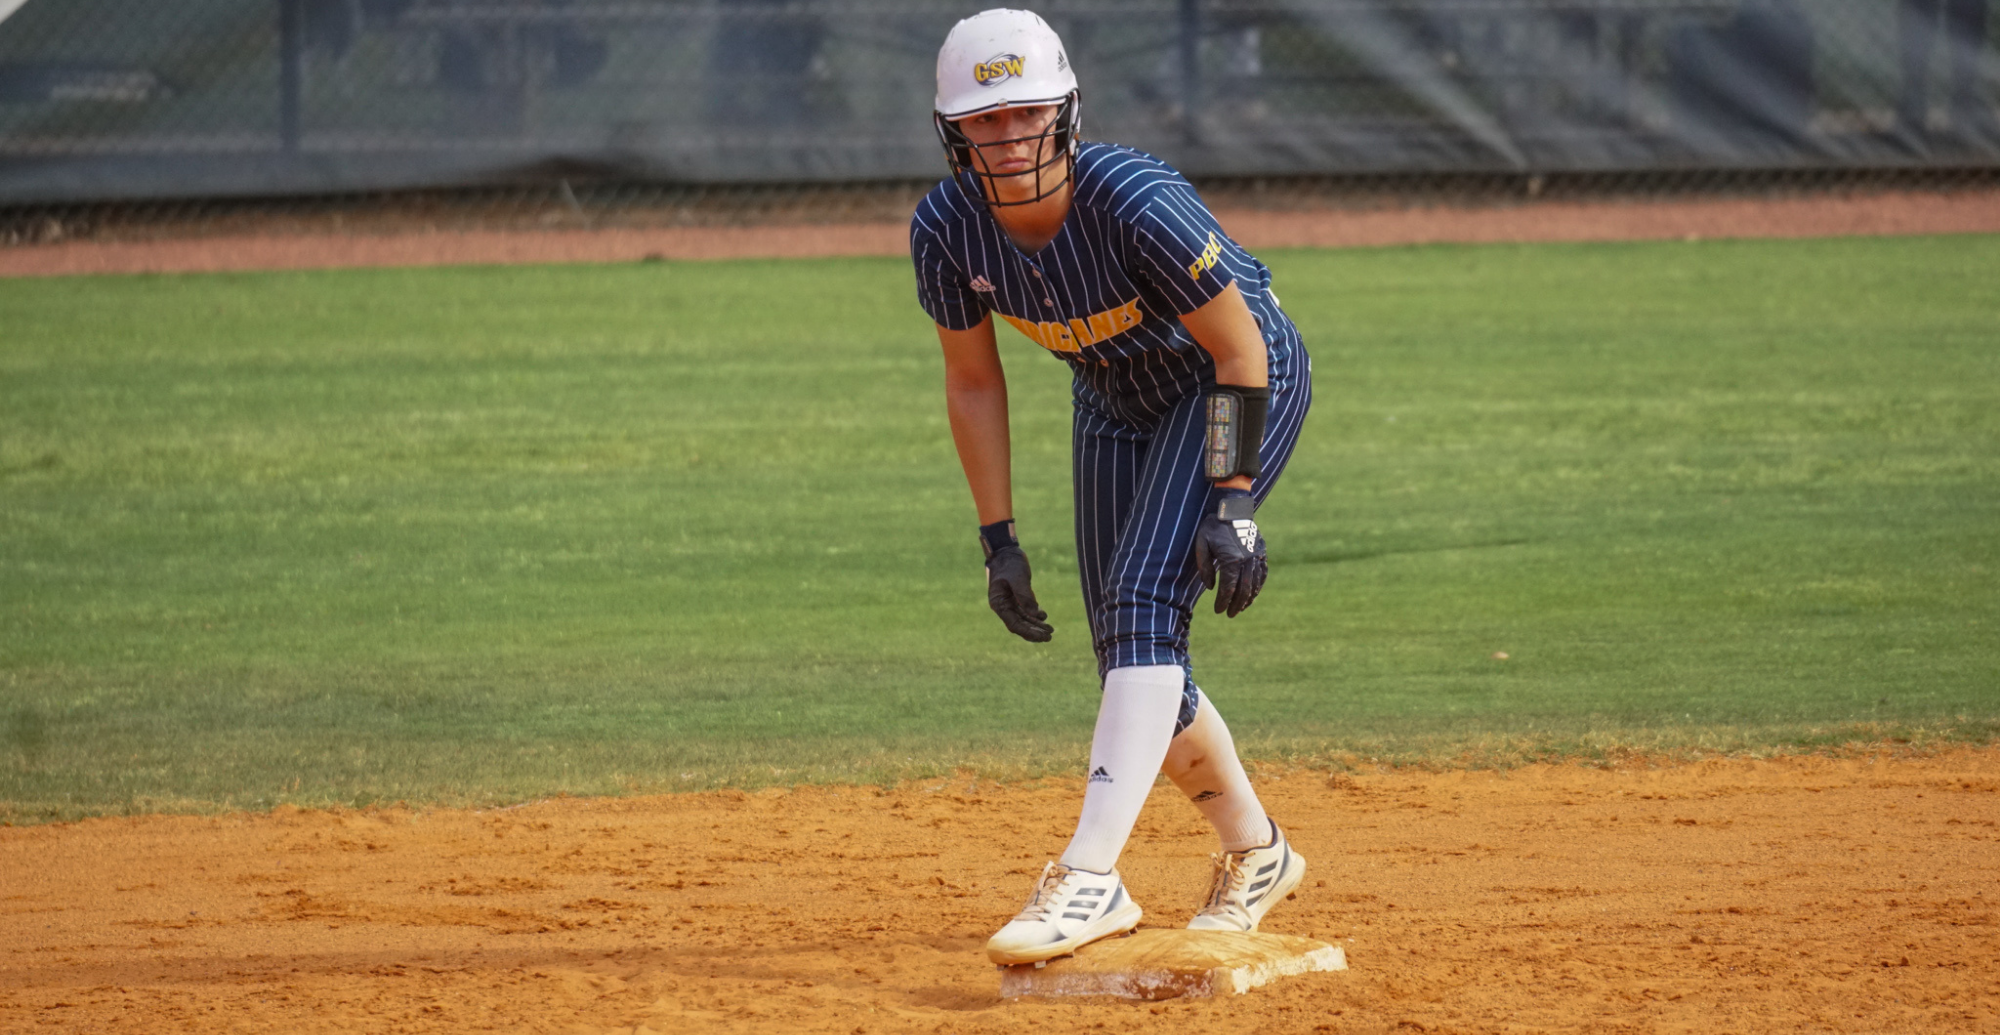 Lady Canes Win Series Over Saints